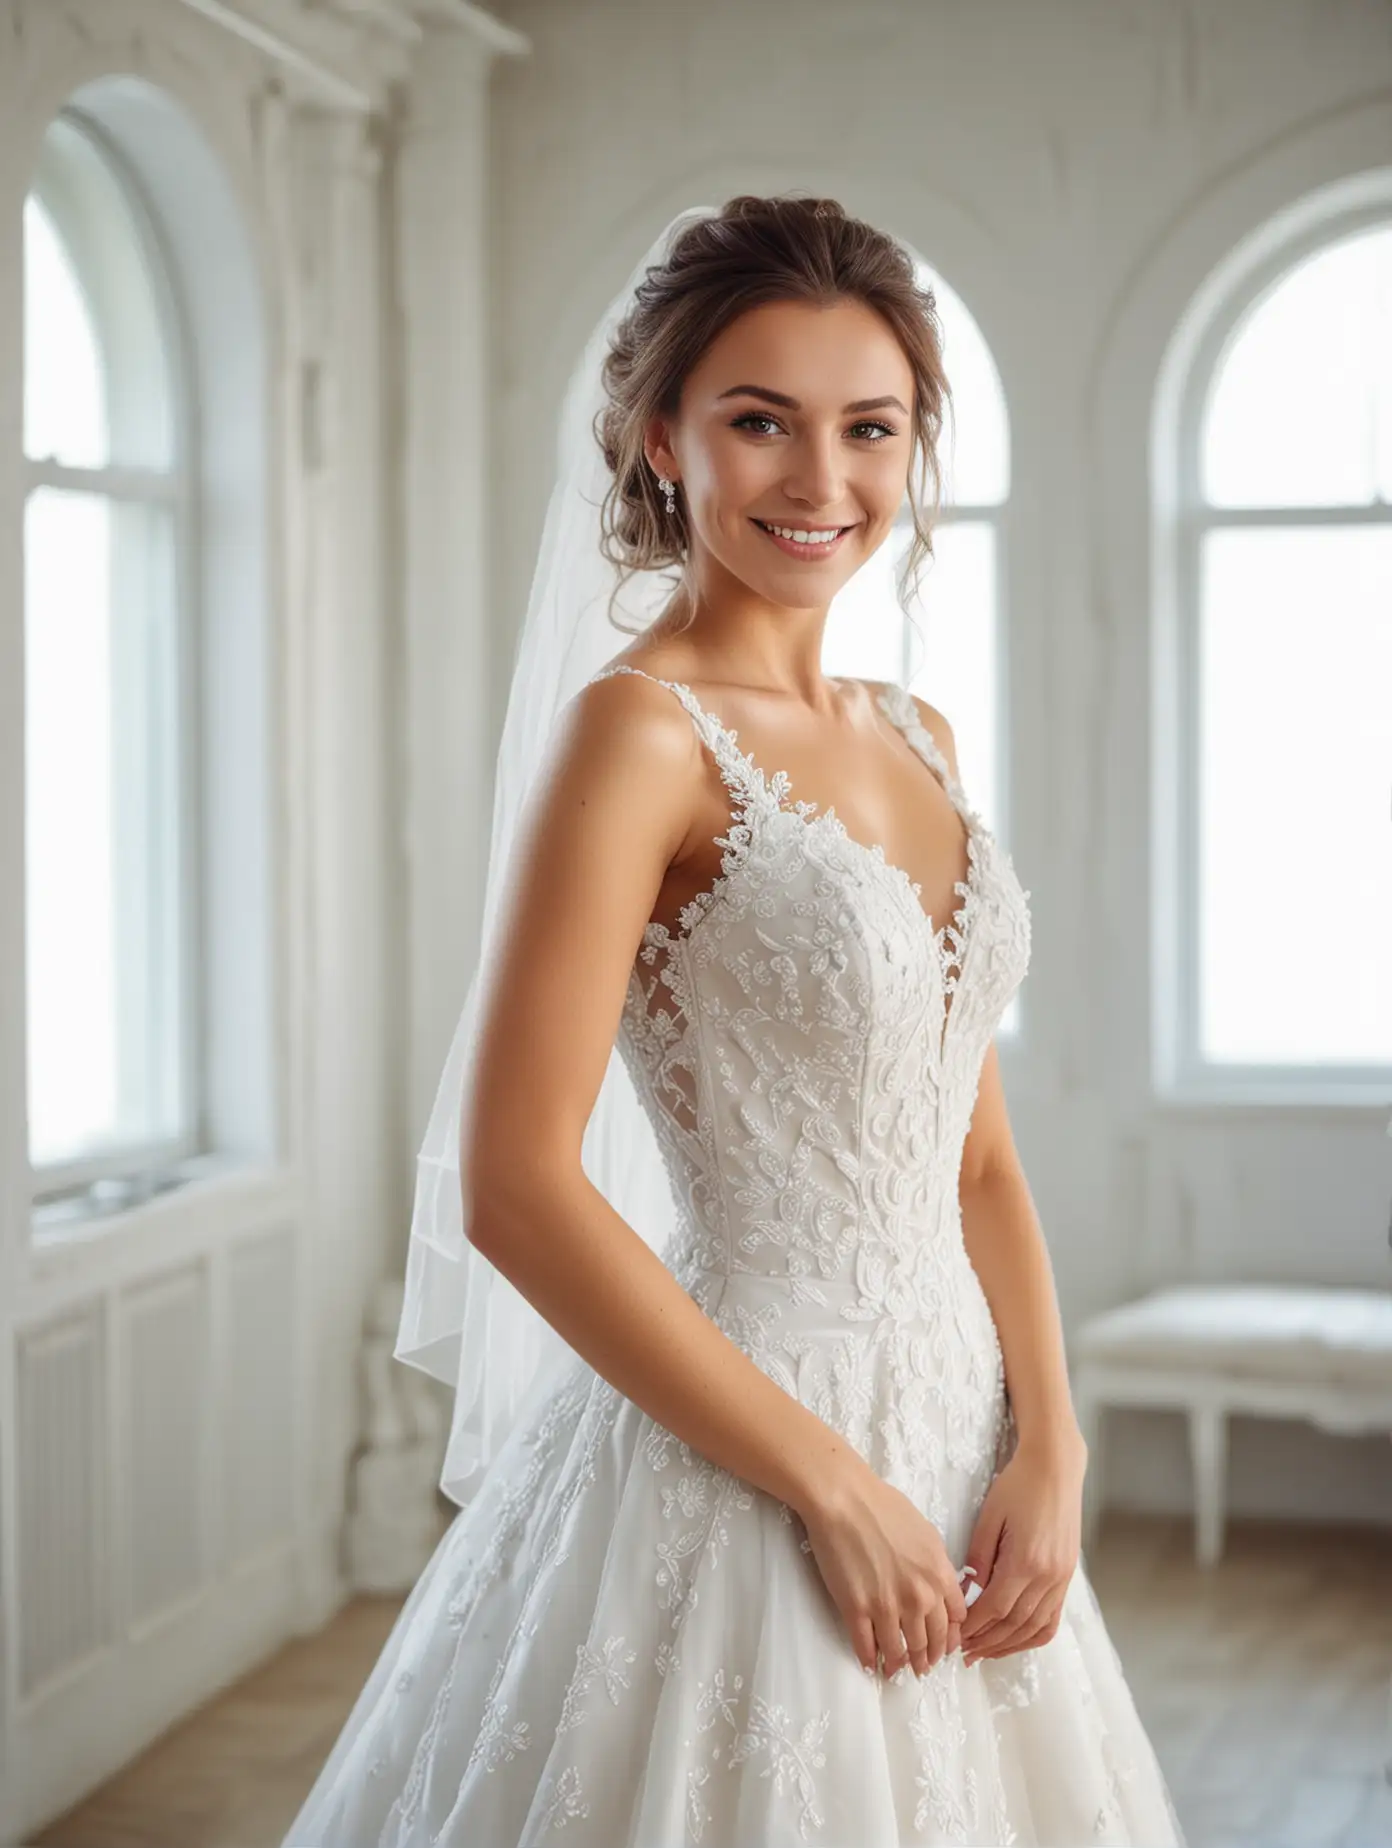 Smiling, young beauiful happy bride wearing white wedding dress and posing in bright empty interior